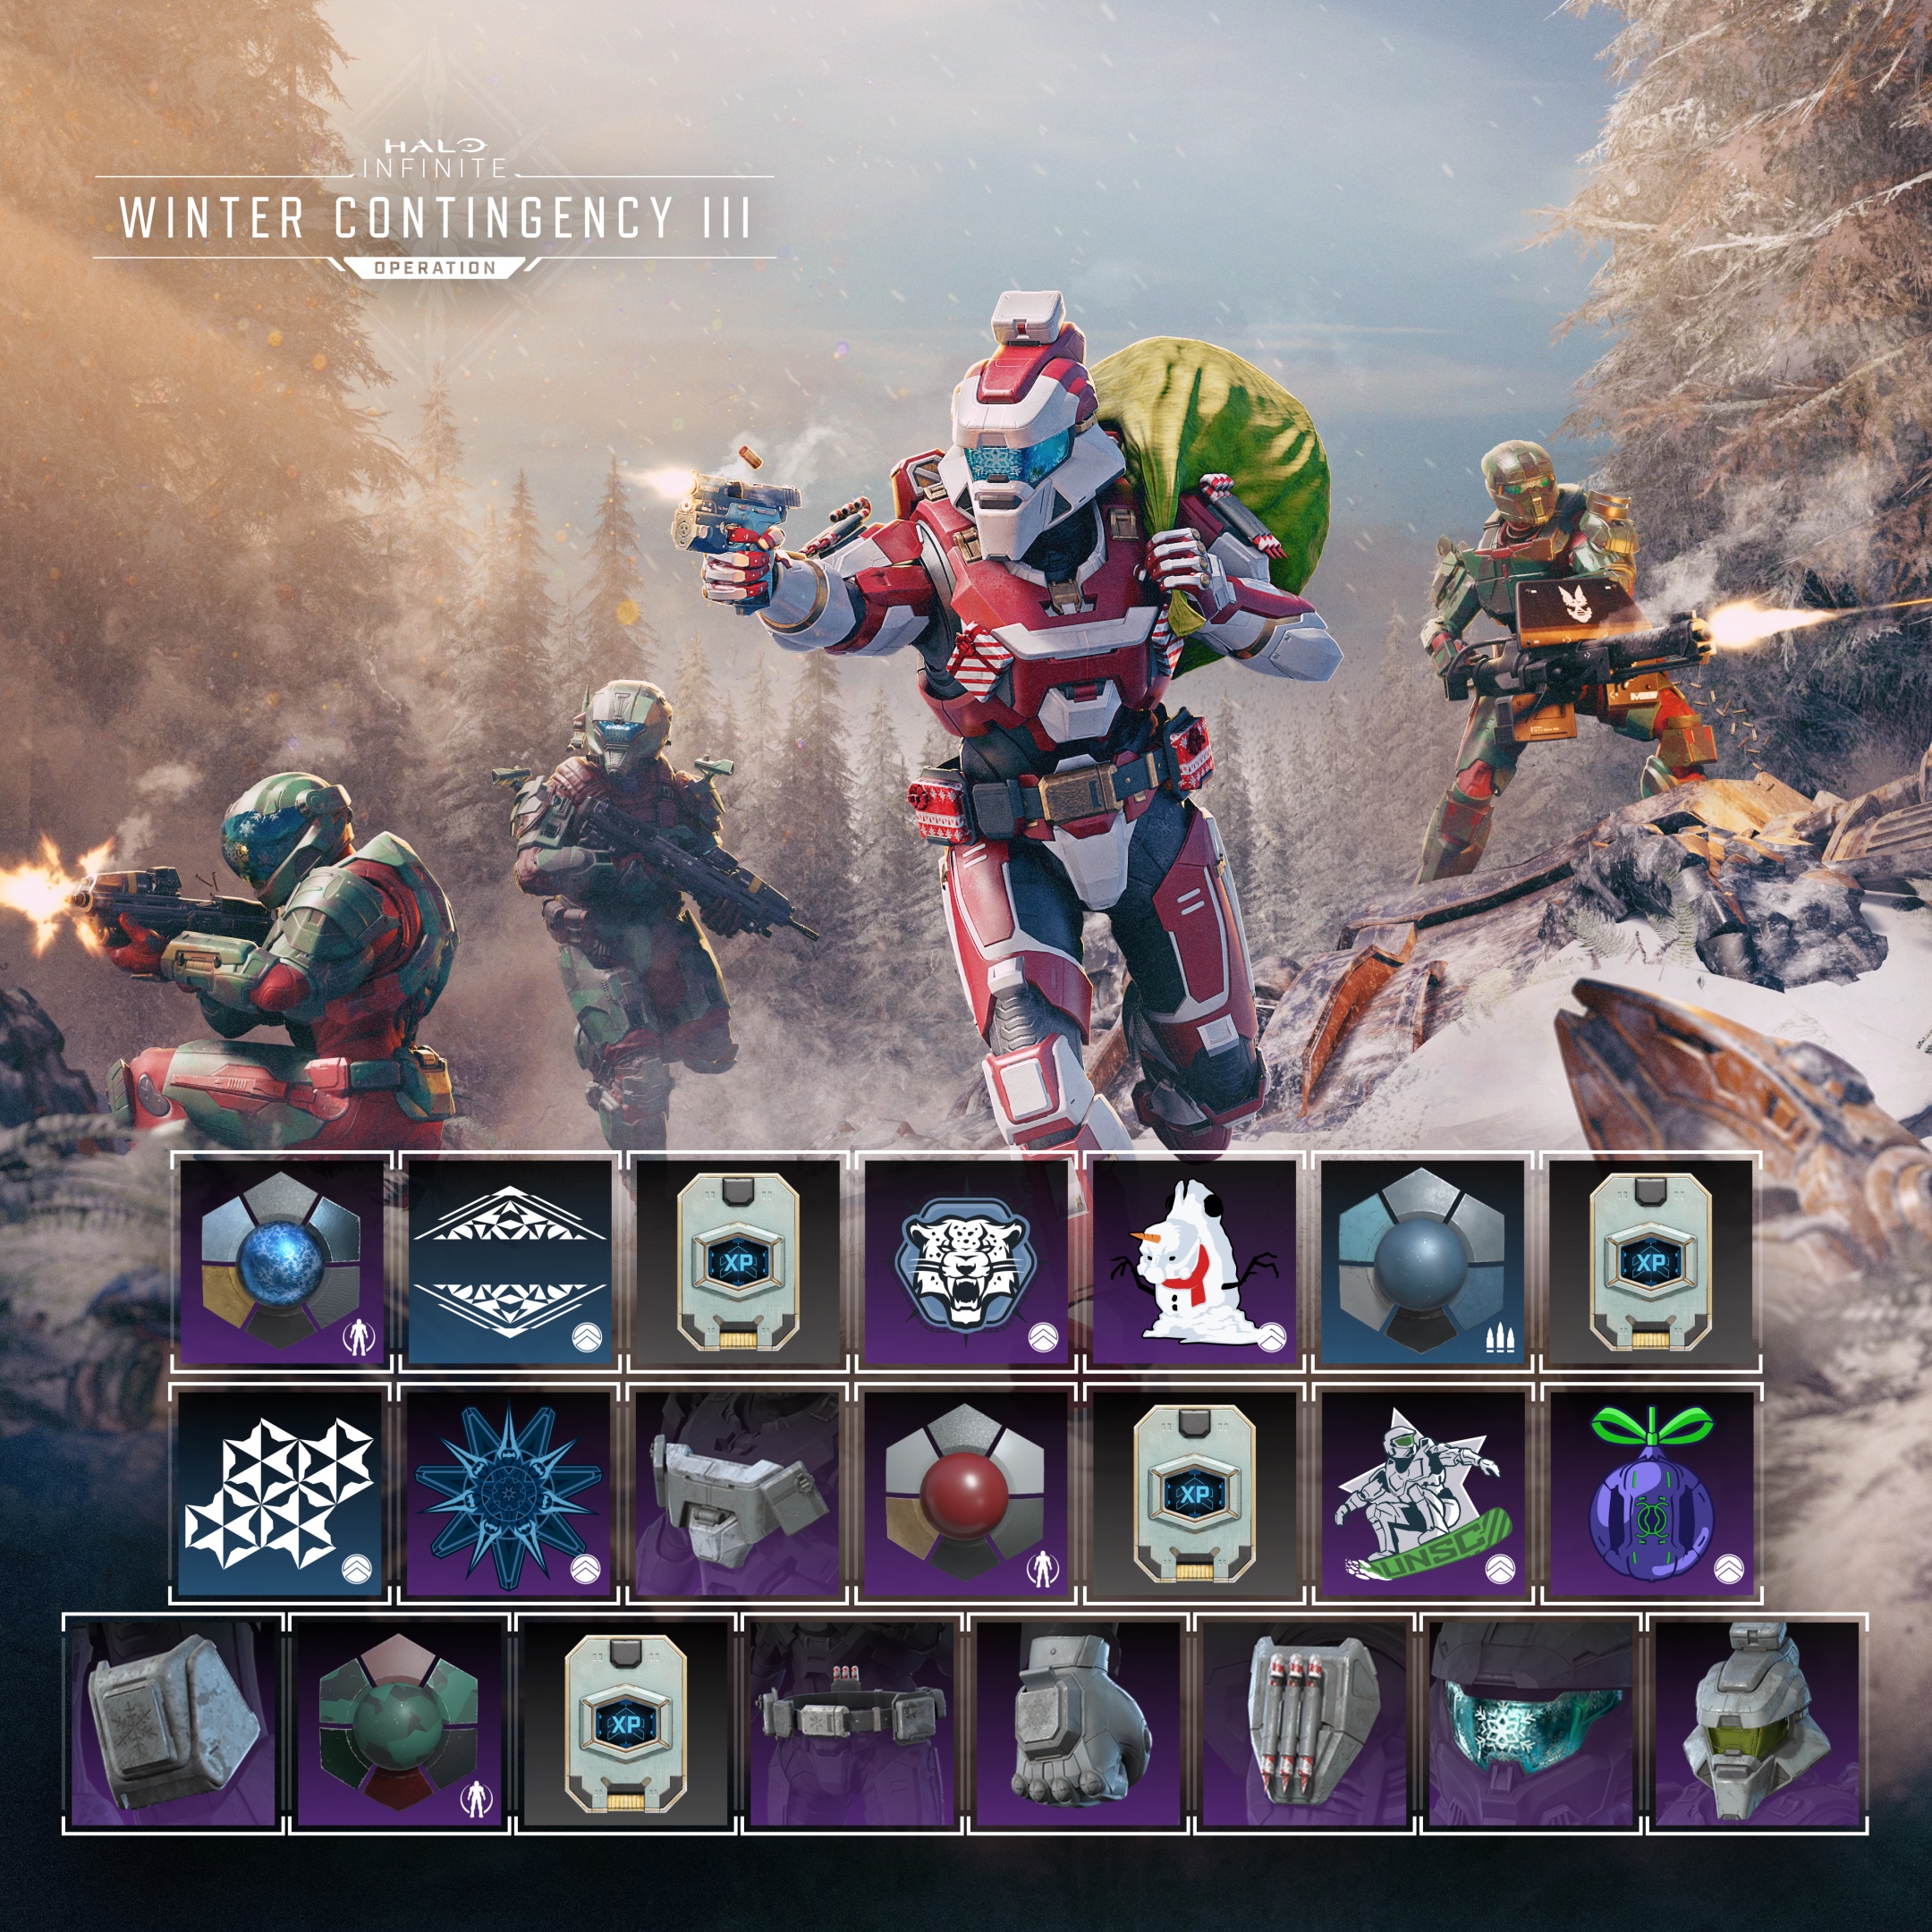 Image showing Winter Contingency III's key art and free reward track containing 22 items.